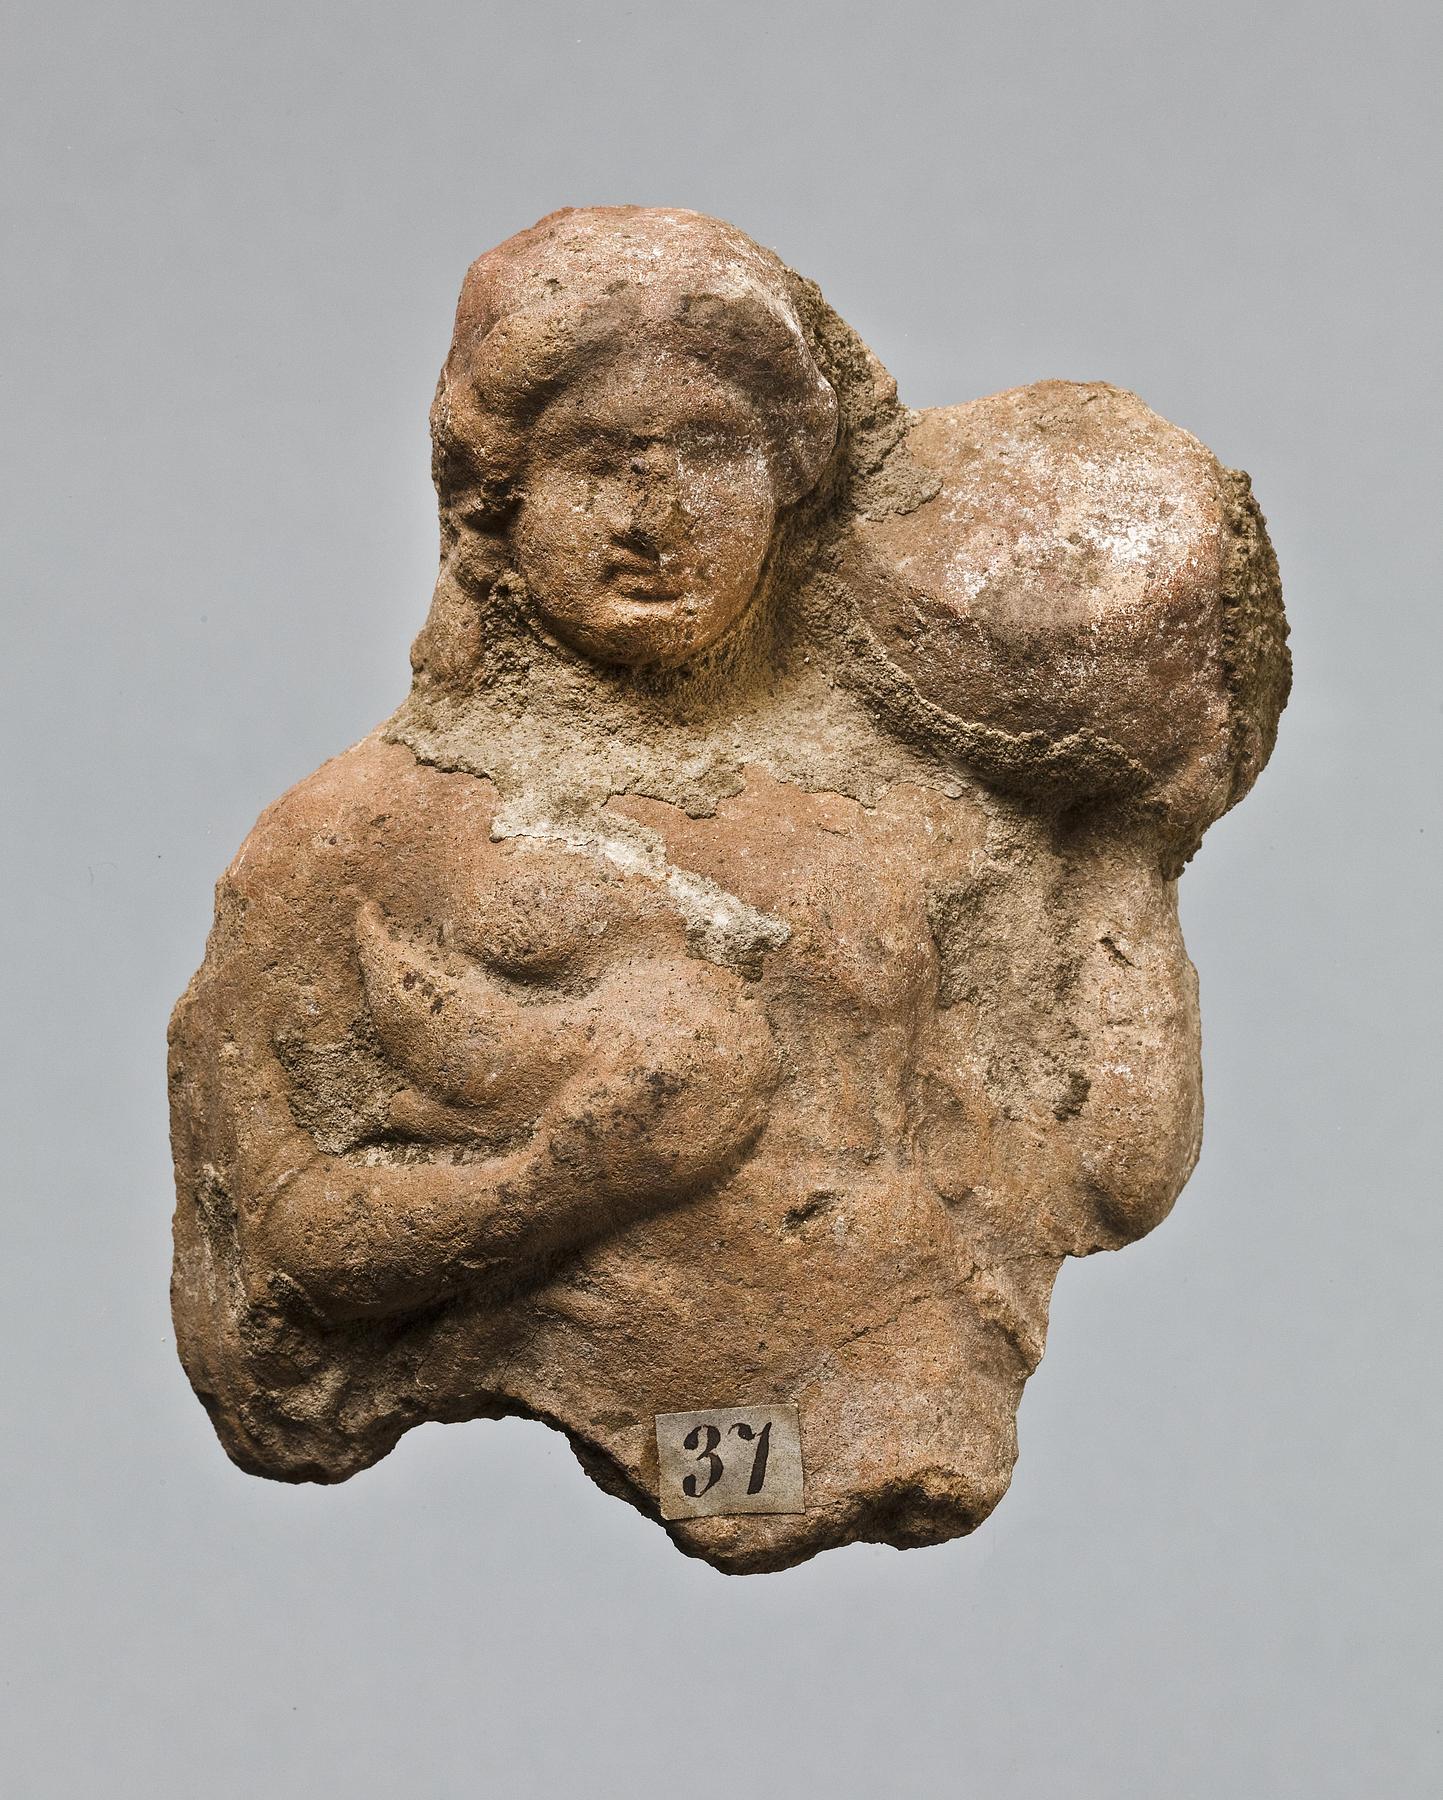 Statuette of a woman with a piglet and cista mystica, H1037